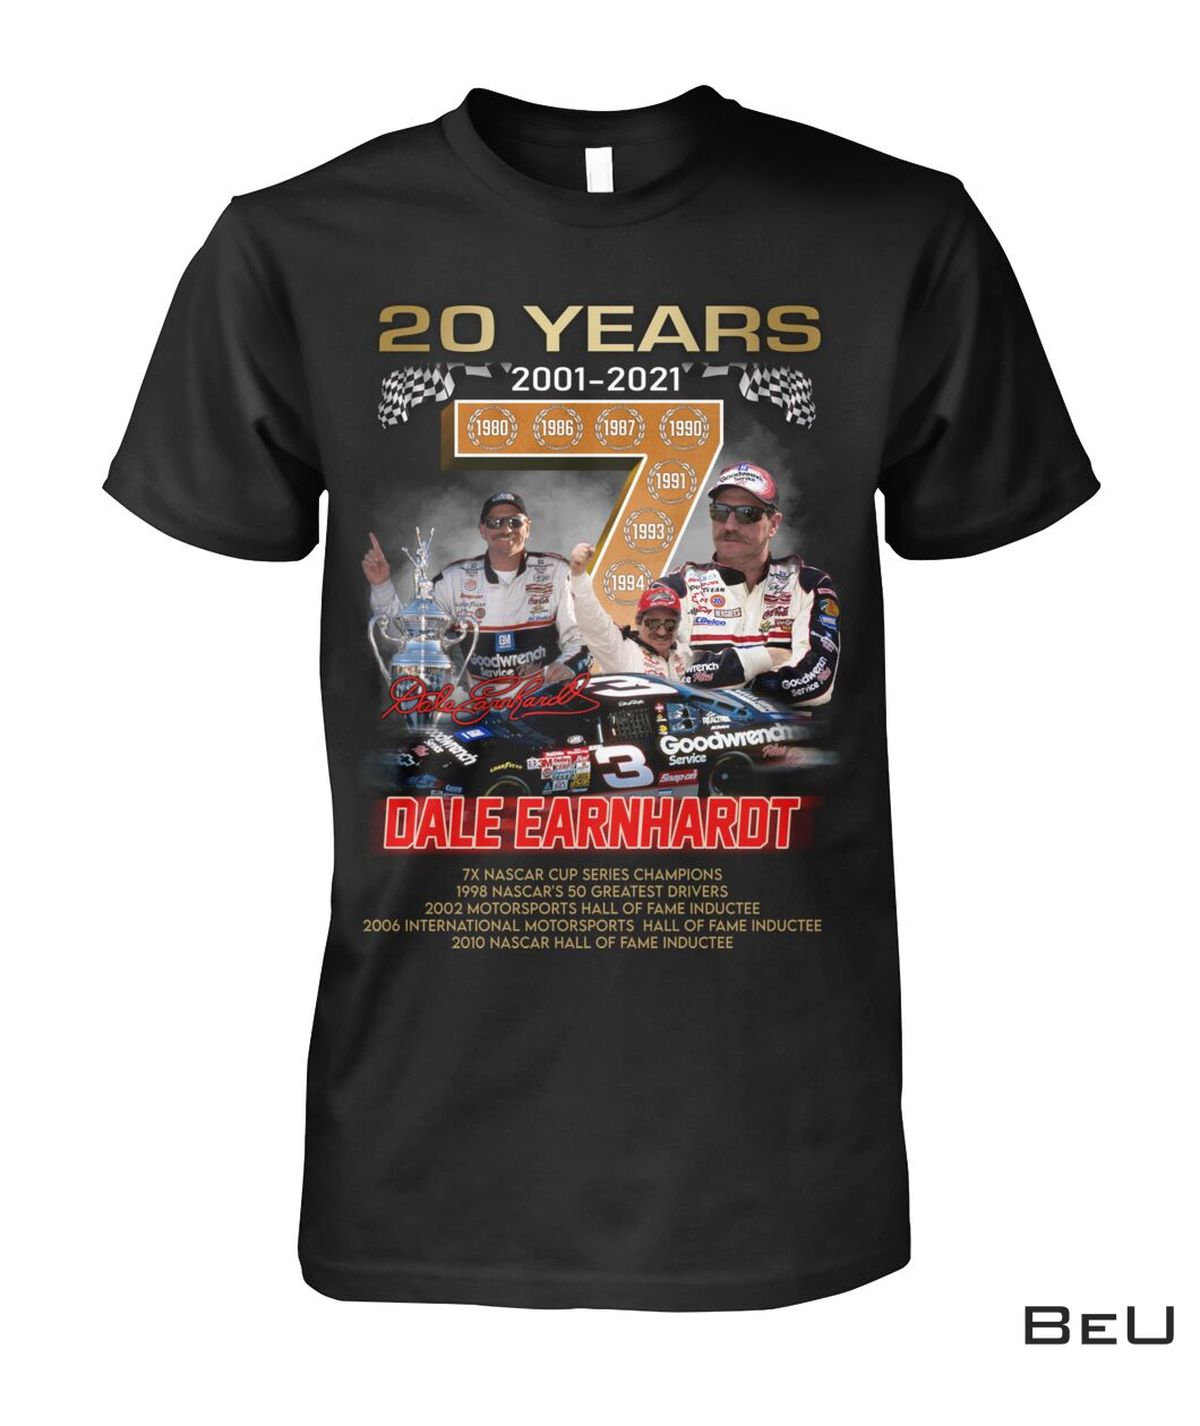 Dale Earnhardt 20 Years 7x Nascar Cup Series Champion Shirt